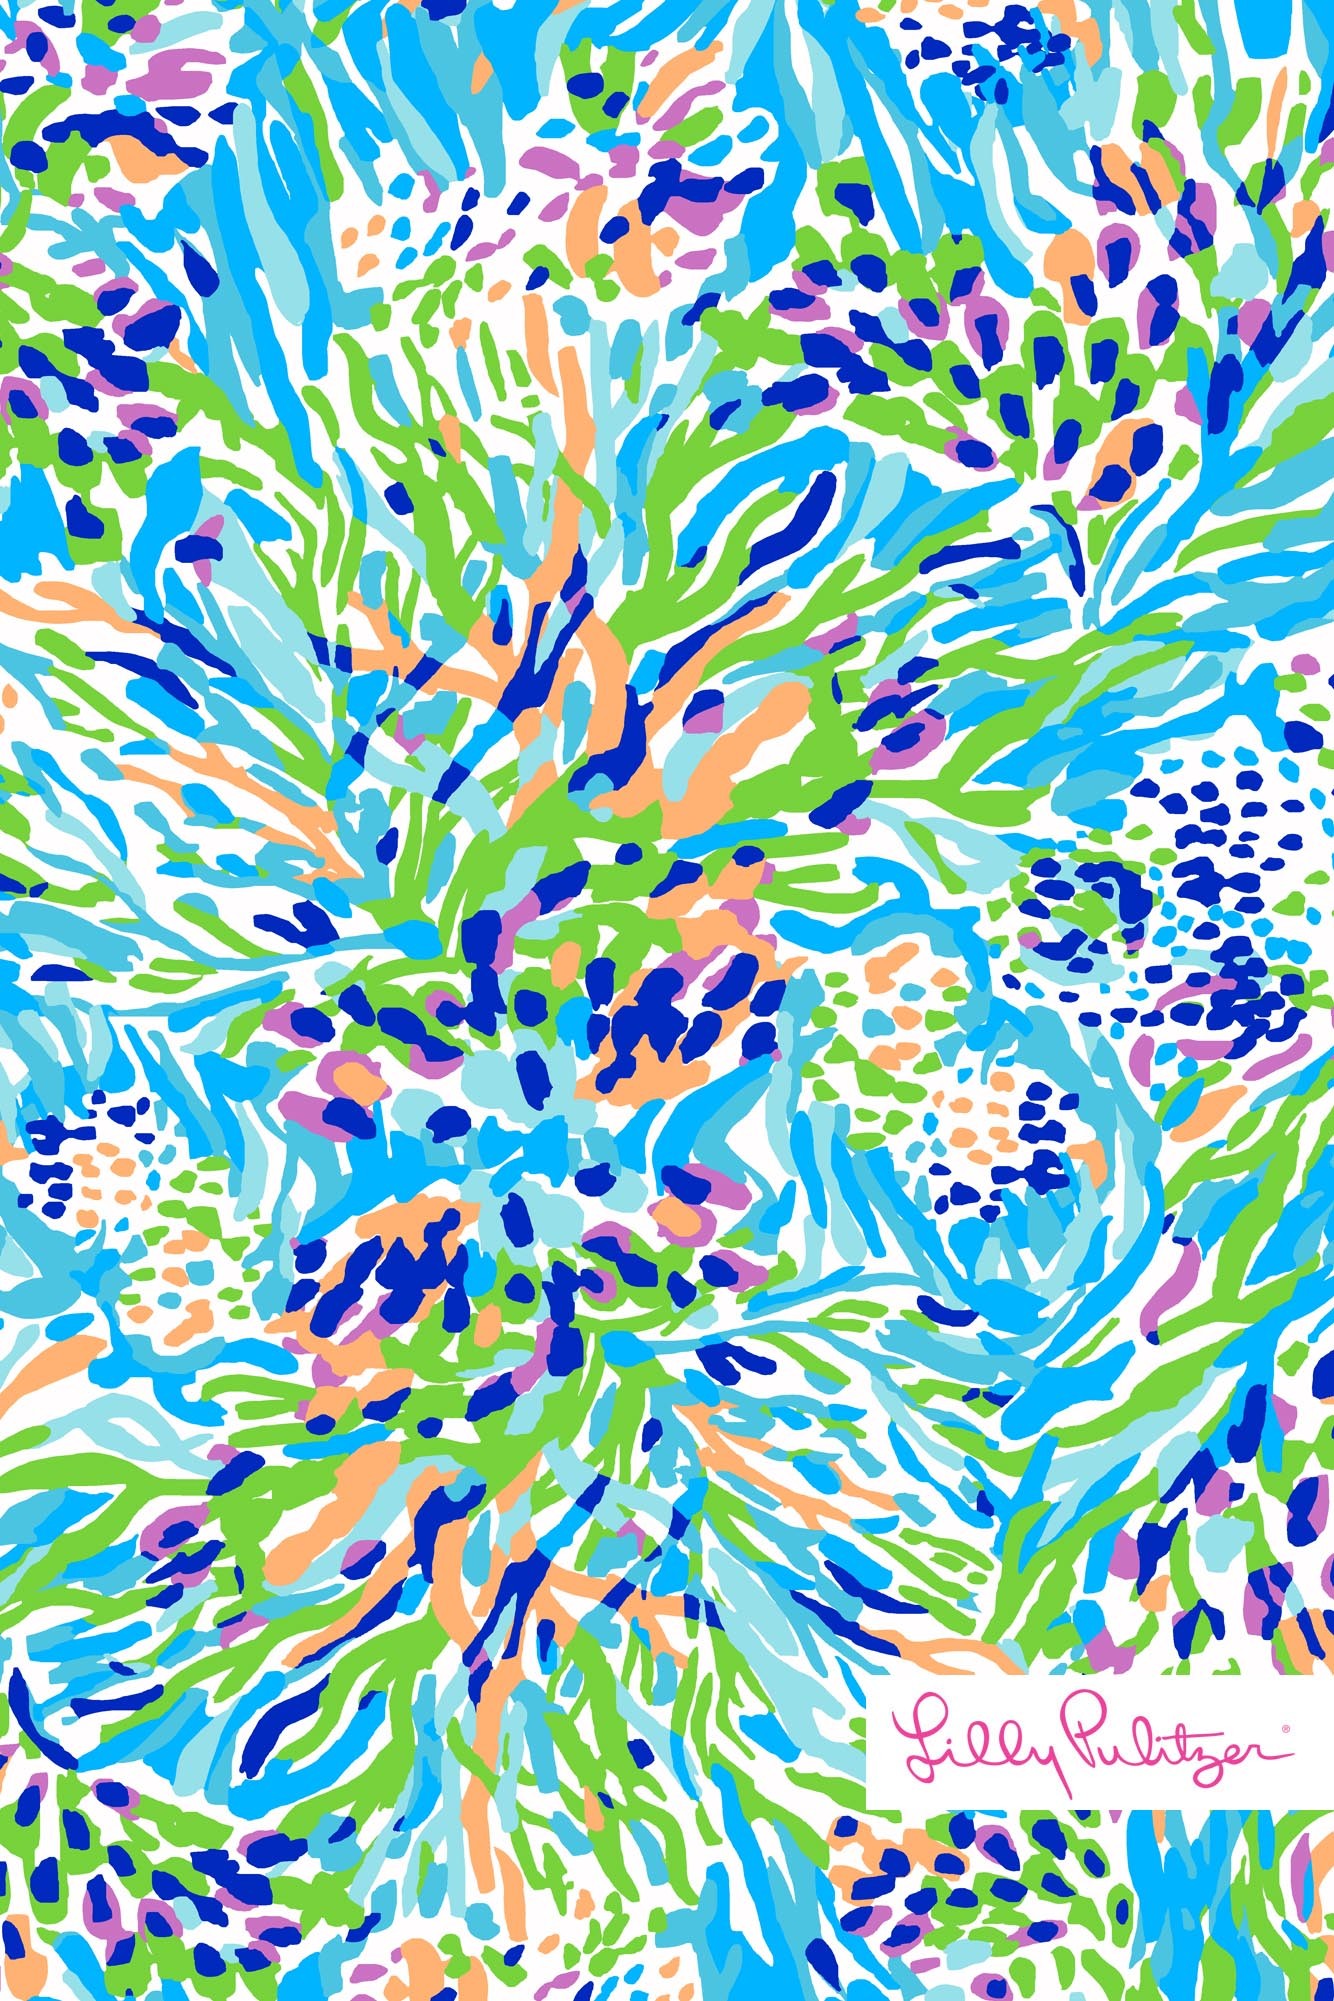 Lilly Pulitzer Wallpaper Backgrounds (65+ images)
 Lilly Pulitzer Iphone Wallpaper Seahorse